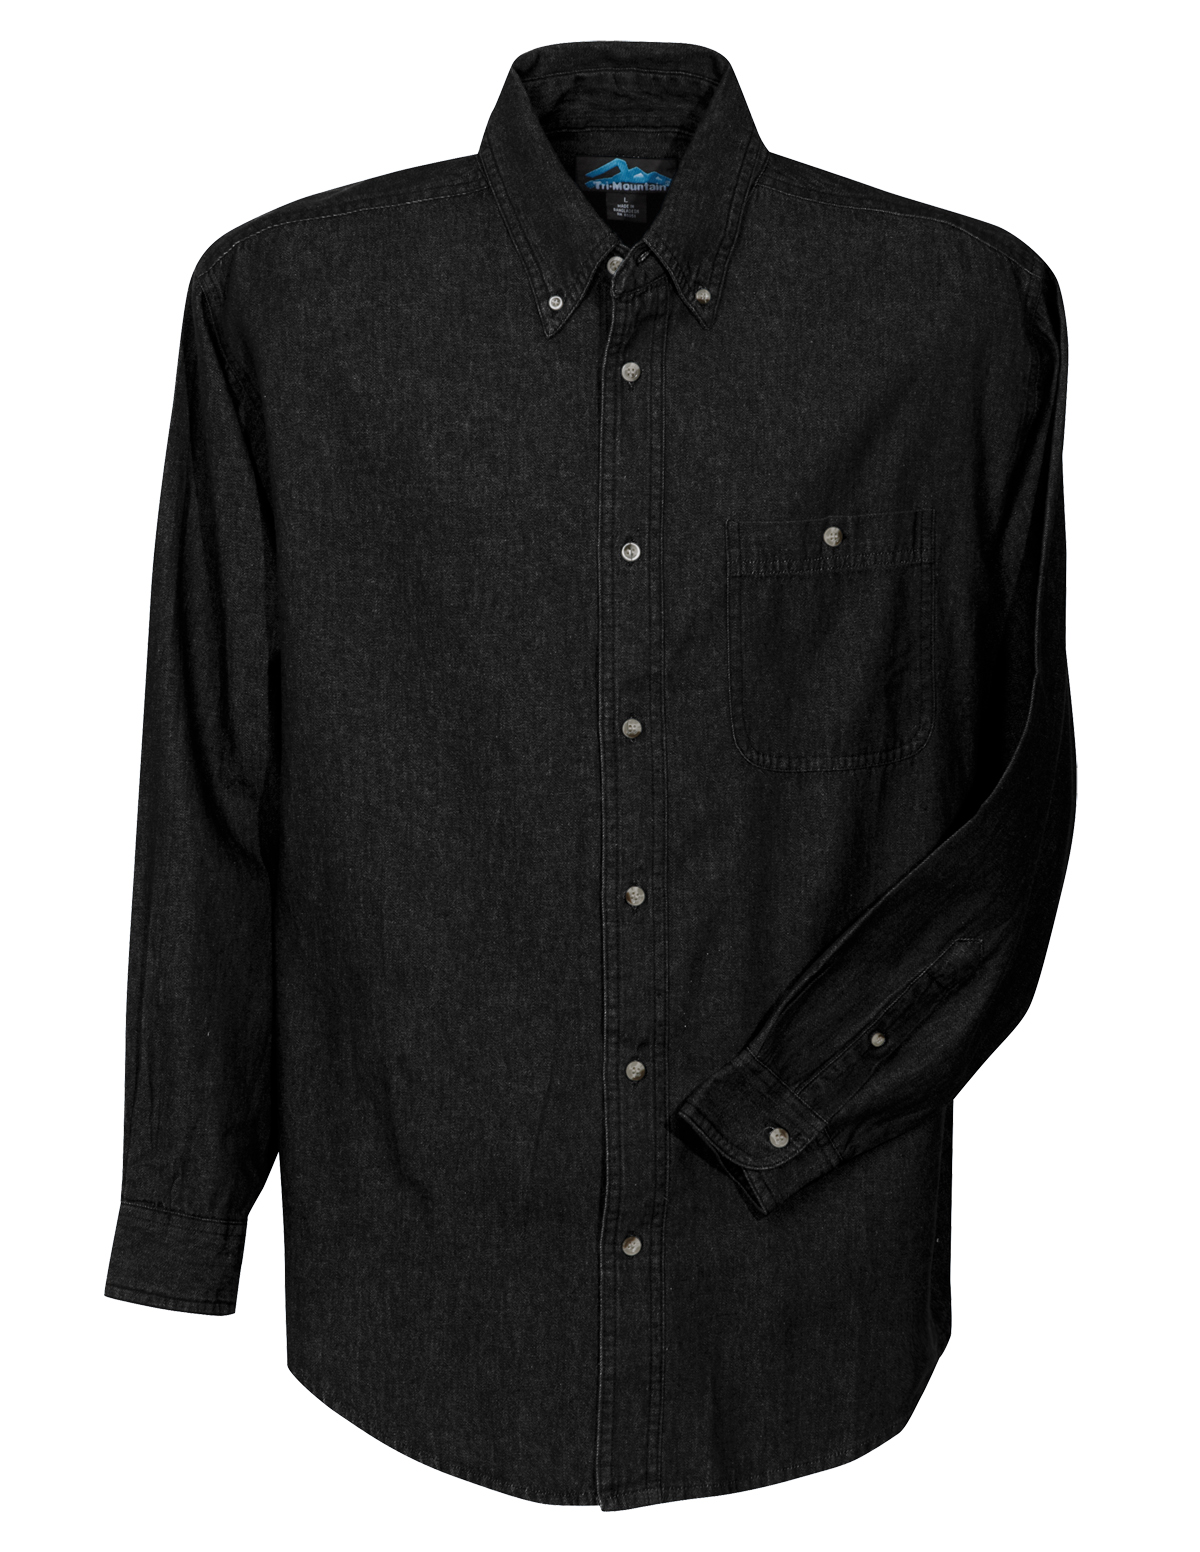 Tri-Mountain Long Sleeve Wrinkle Resistant Shirt with Mini-Houndstooth Design 